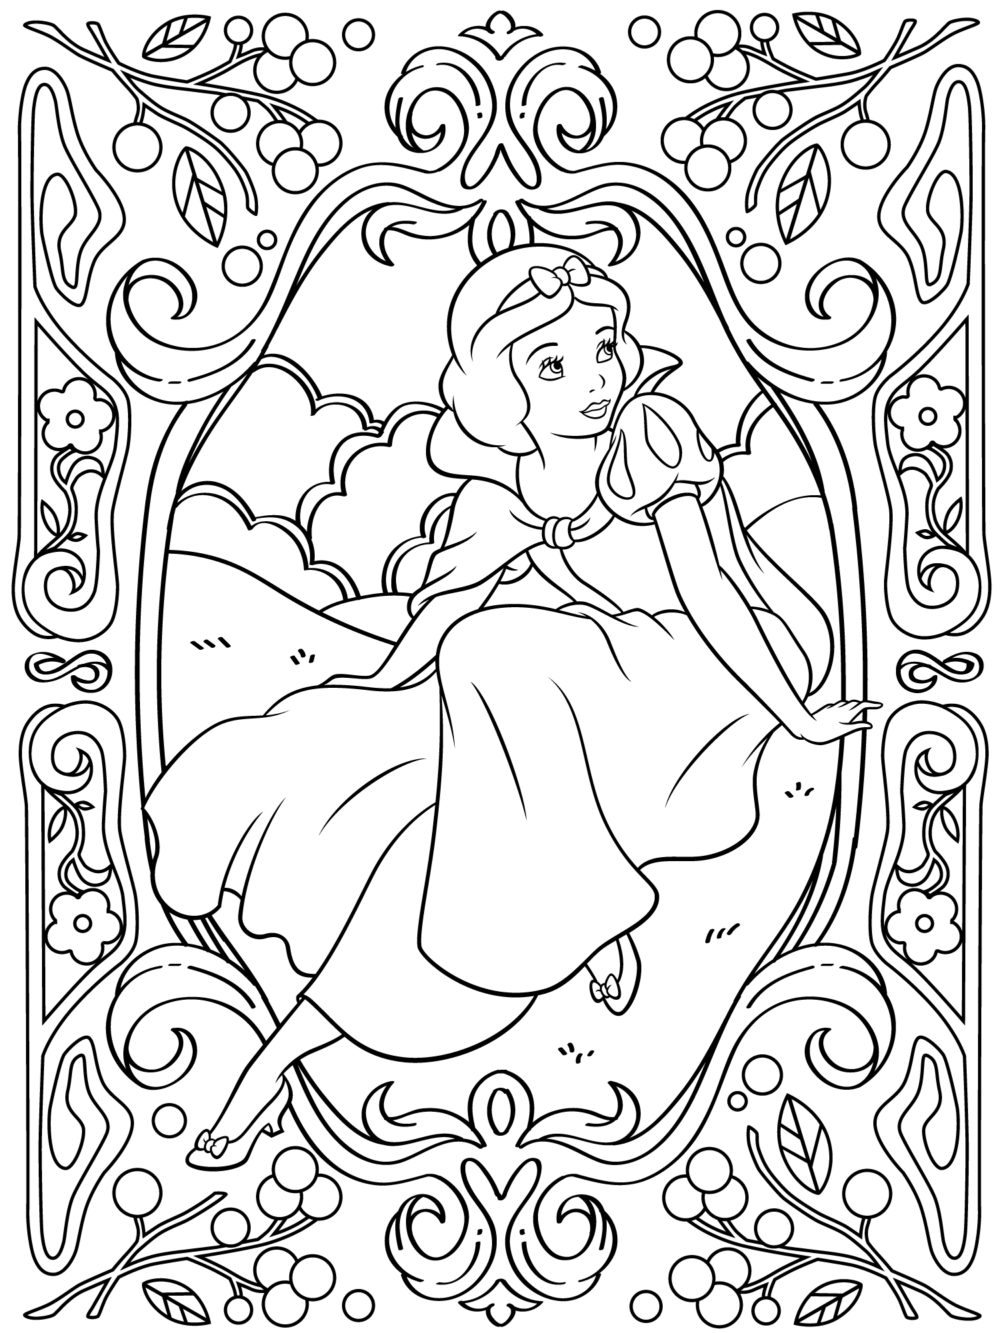 Coloring Pages For Adults Disney at GetColorings.com | Free printable